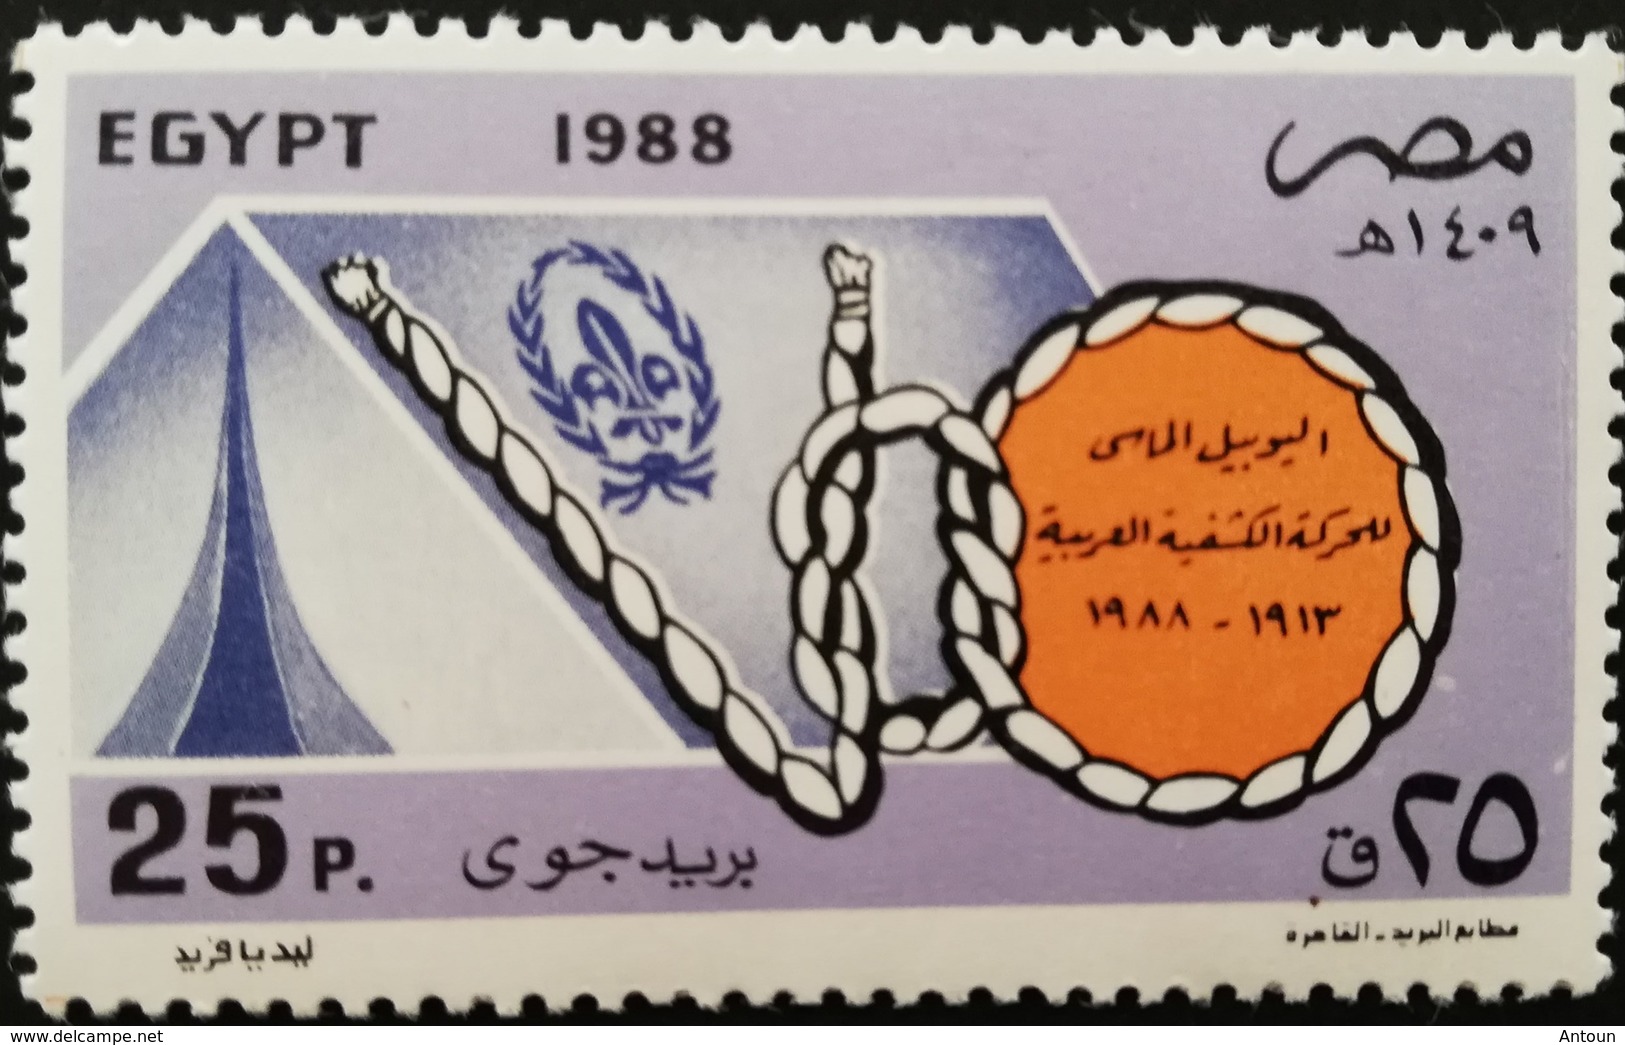 Egypt 1988 Arab Scouting Organization  POSTAGE TO BE ADDED ON ALL ITEMS - Unused Stamps